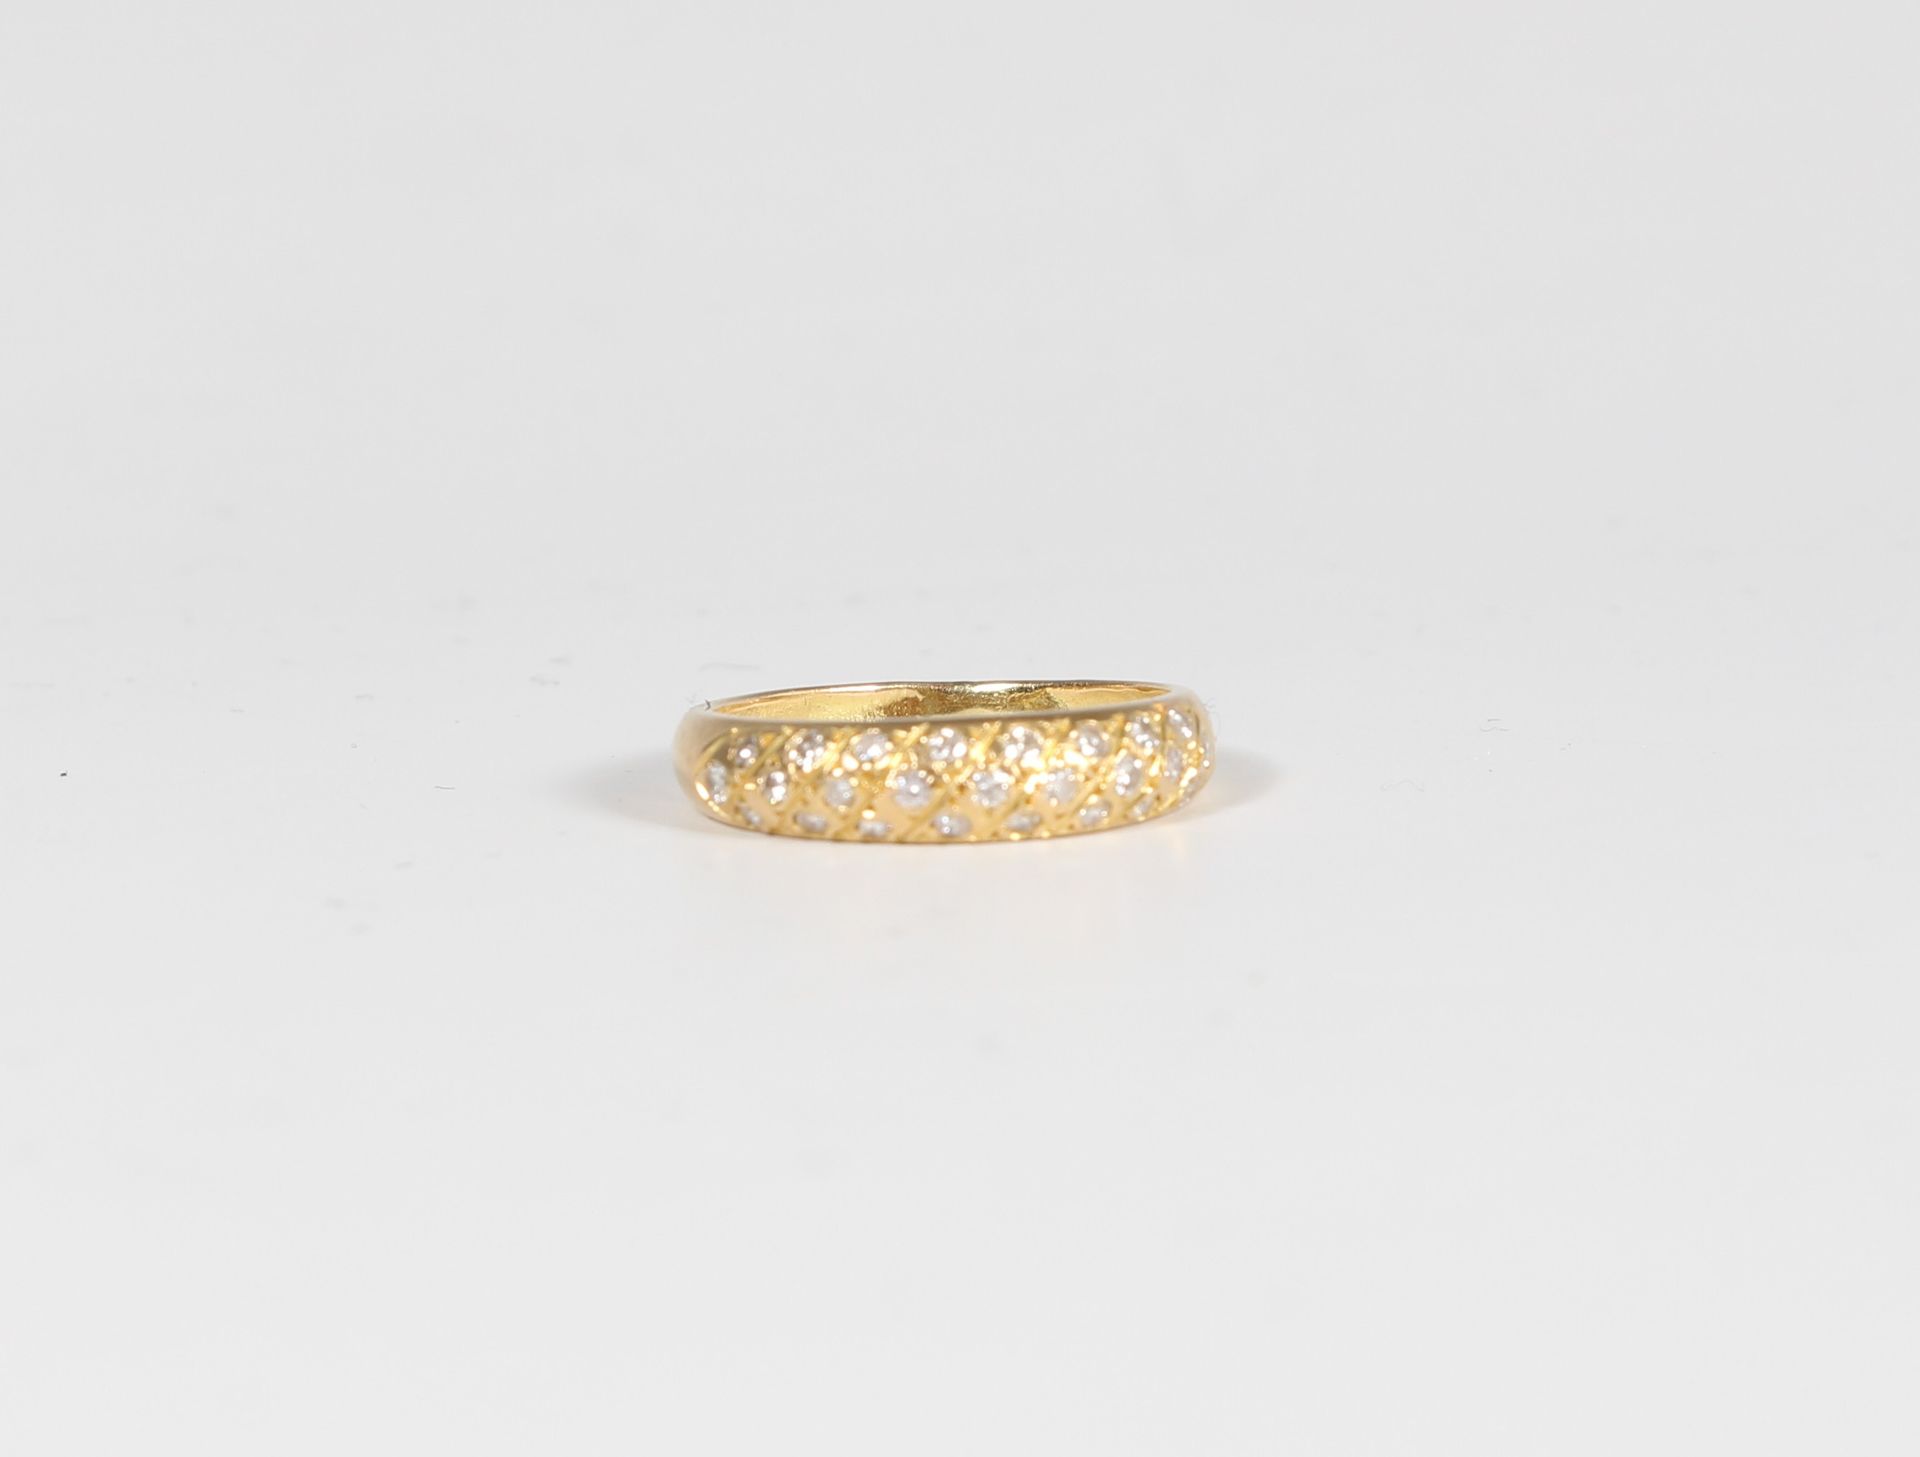 Null Ring in yellow gold 750/1000è set with diamonds. Weight: 2,53 g

TDD: 51